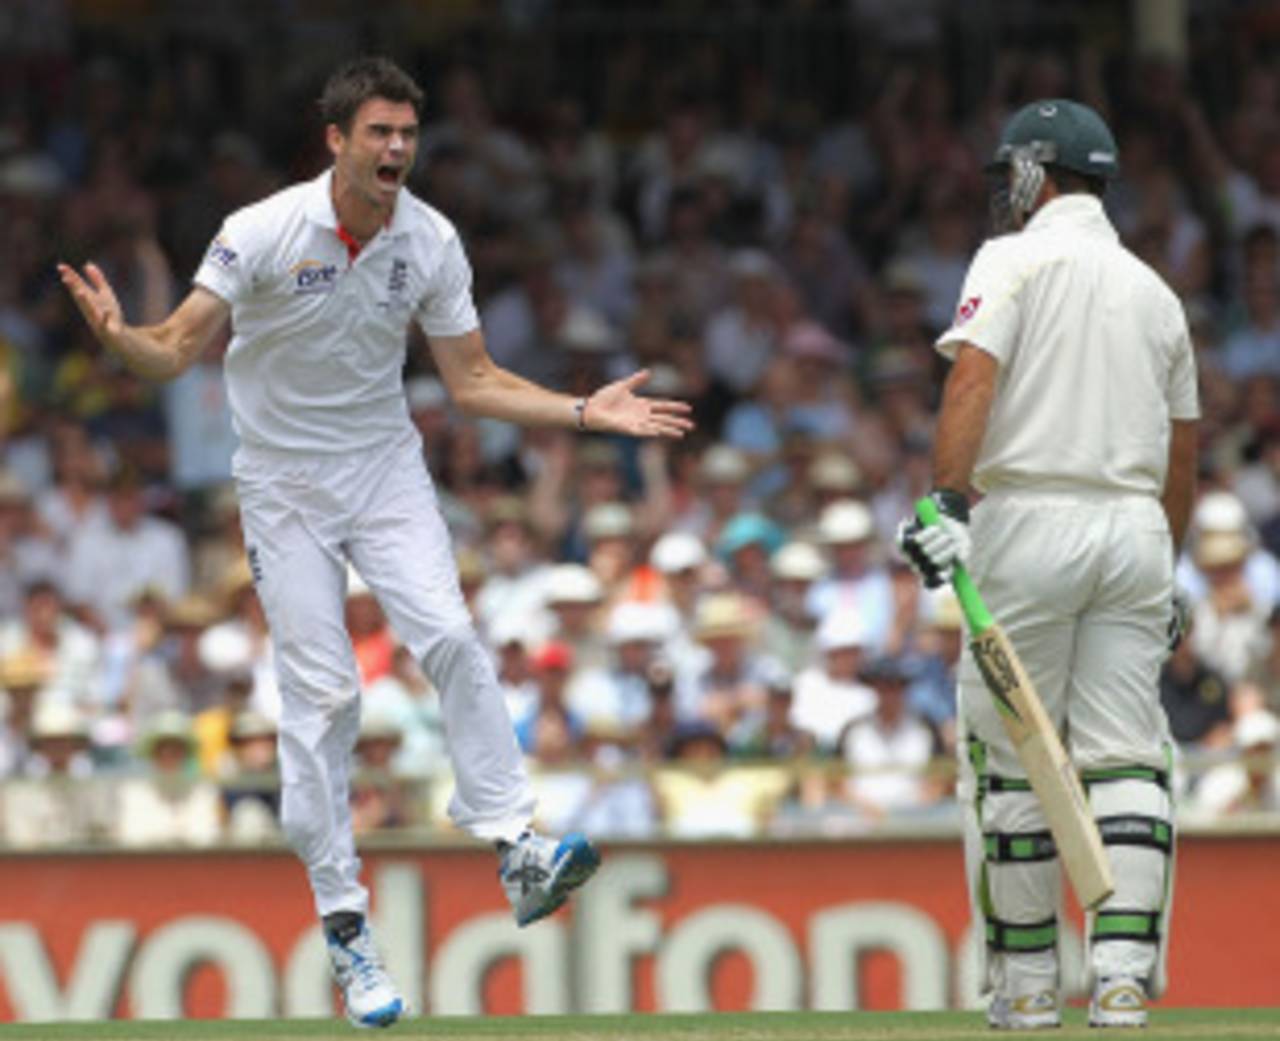 James Anderson removed Ricky Ponting for the third time in the series, Australia v England, 3rd Test, Perth, 1st day, December 16, 2010